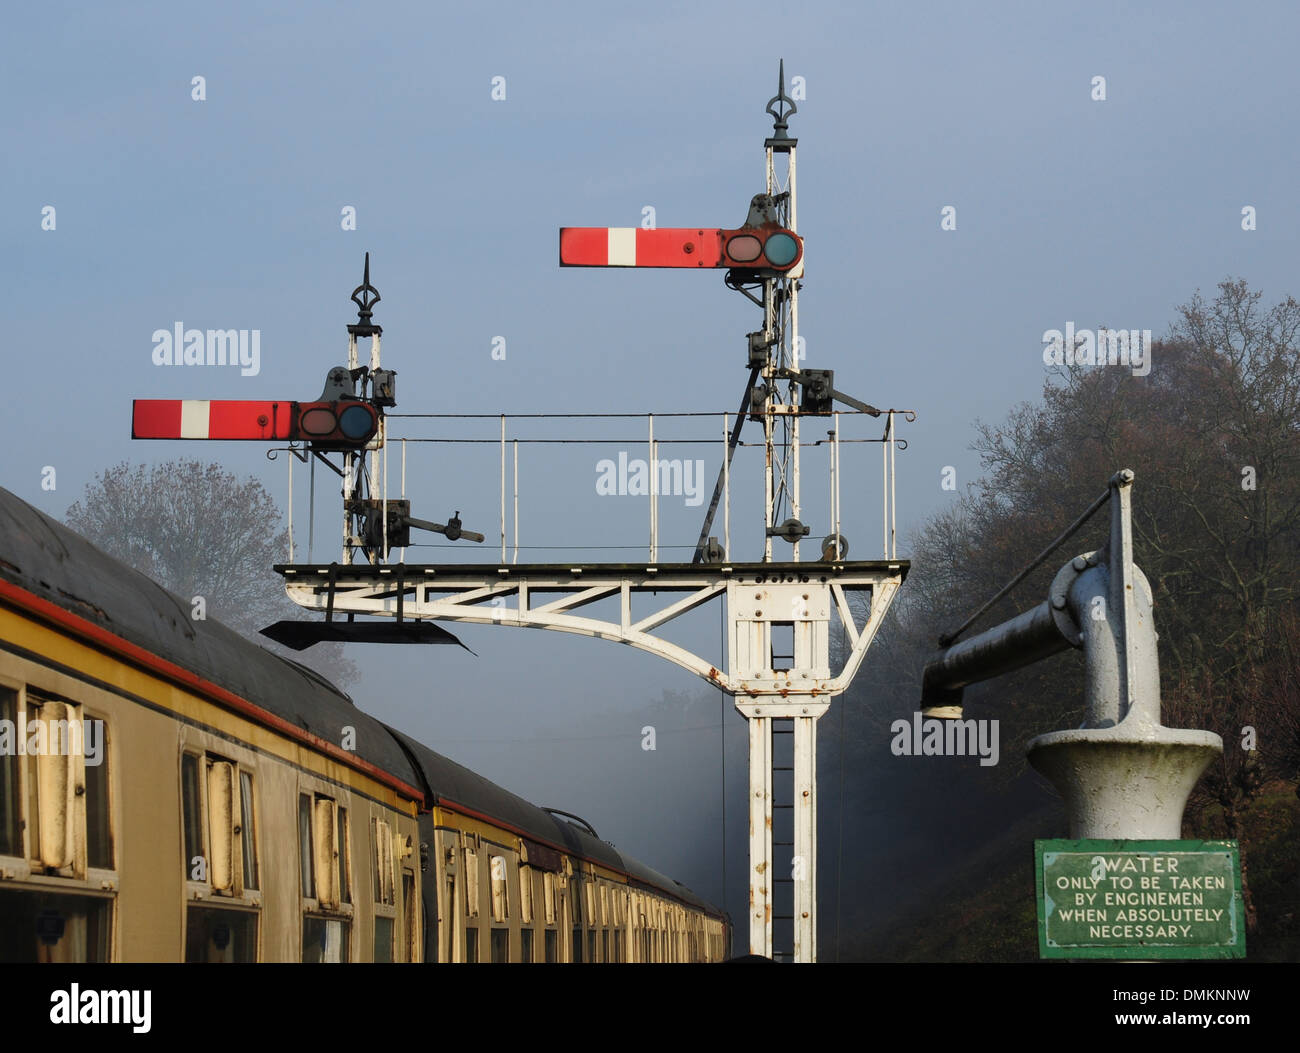 Semaphore signals and water crane in winter mist at Horsted Keynes station on the Bluebell Railway, Sussex, England, UK Stock Photo